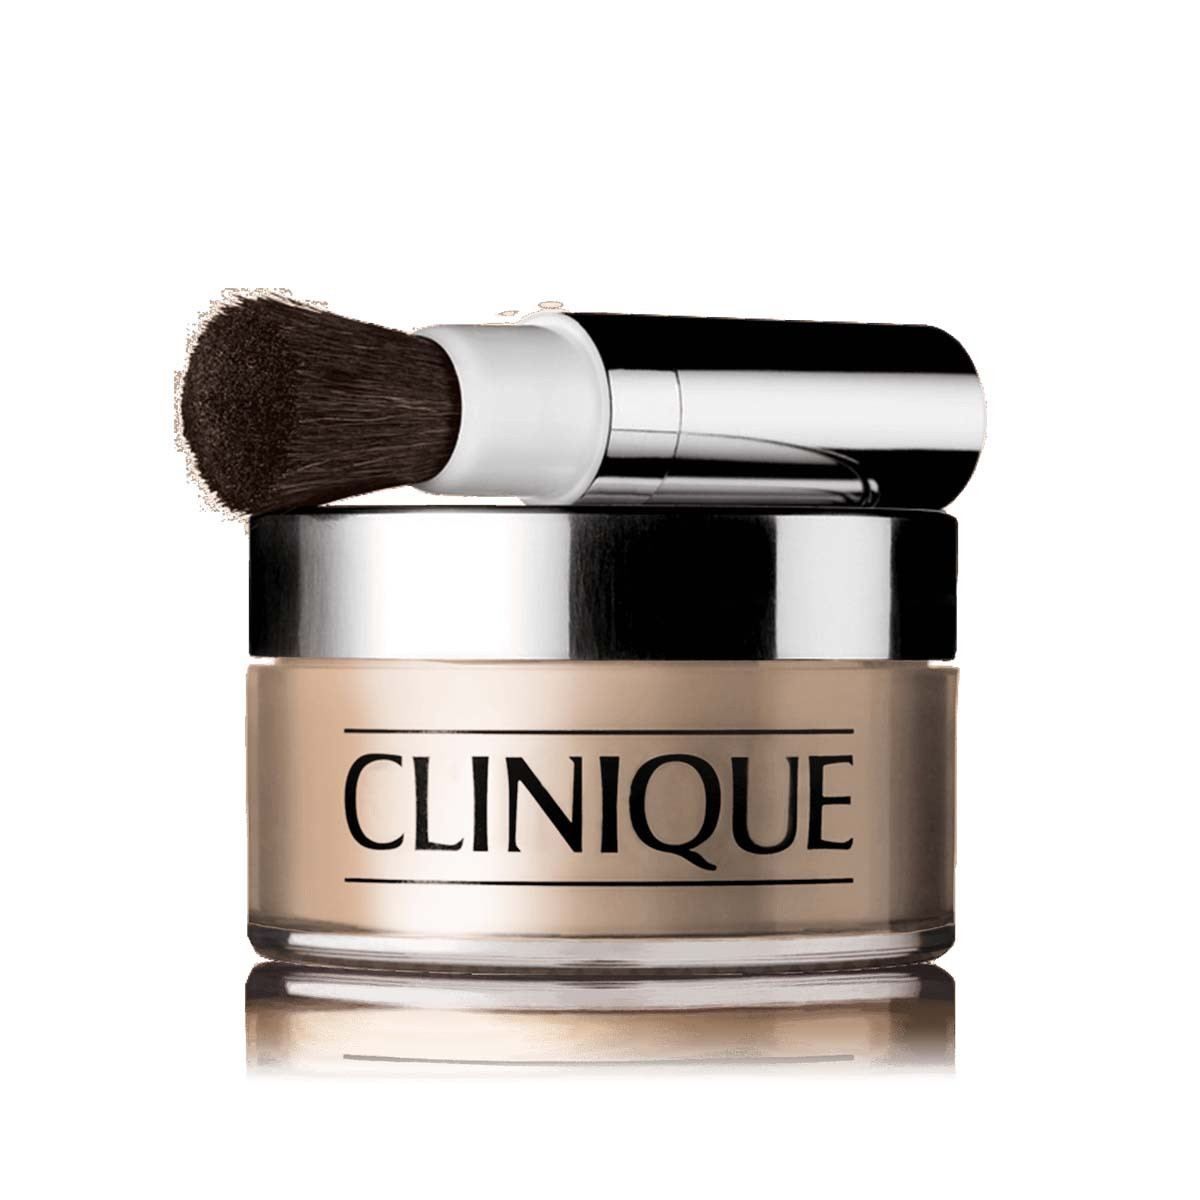 Clinique blended face powder trasparency 03, 03 CLINIQUE, large image number 0